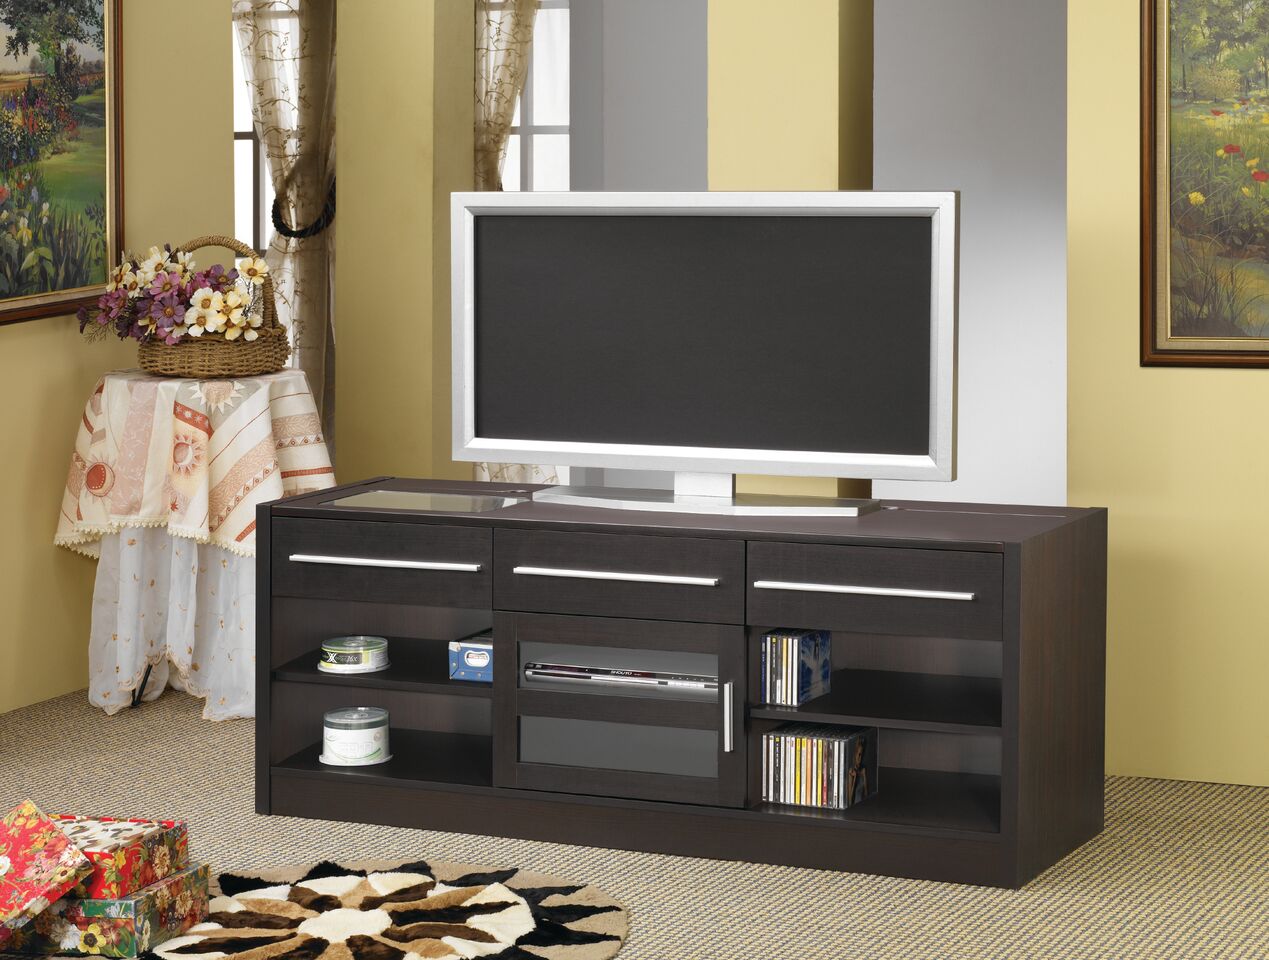 TV6111 - TV Stand